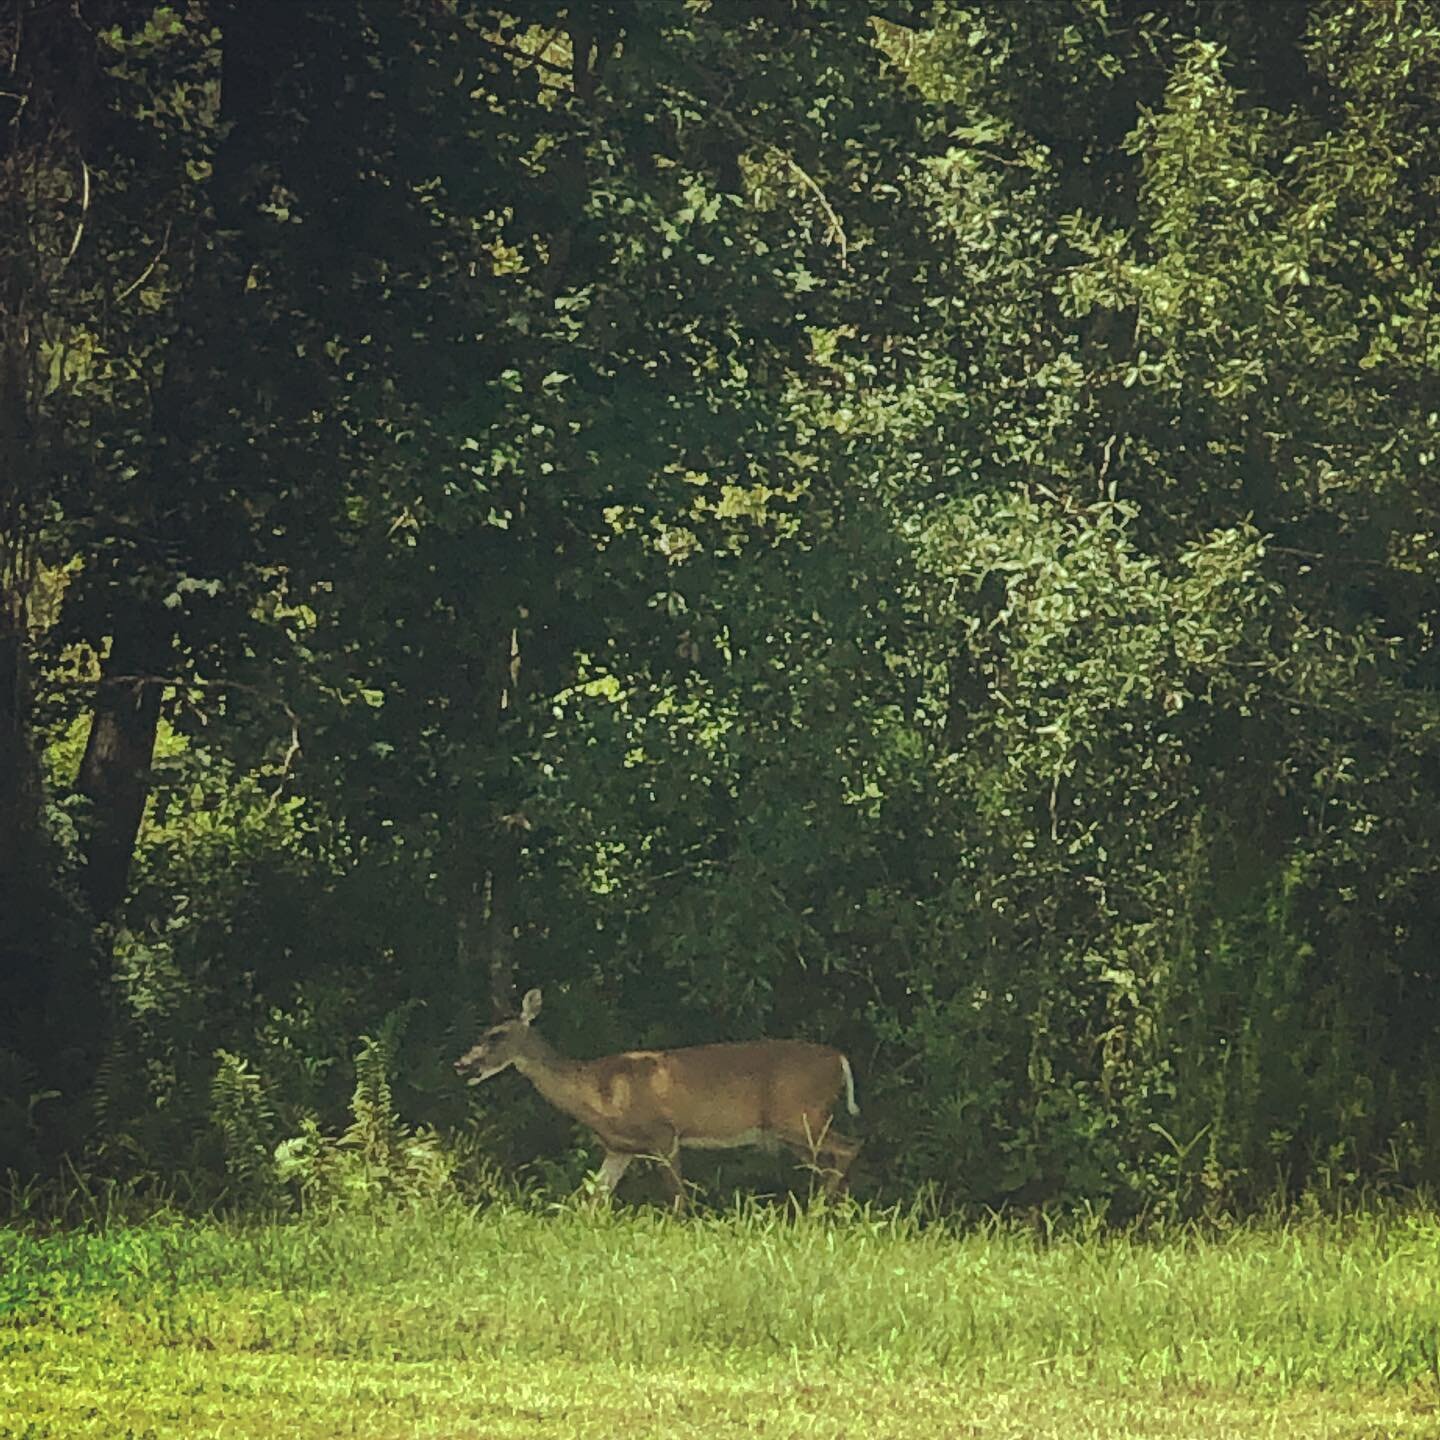 Deer spotting right out the back window of our barndominium.✨

We are home to an abundance of wildlife here at Arrowhead Farms. It is truly our favorite to see the illusive deer this time of year.

Our 40 acres of preserved land is lush with birds, w